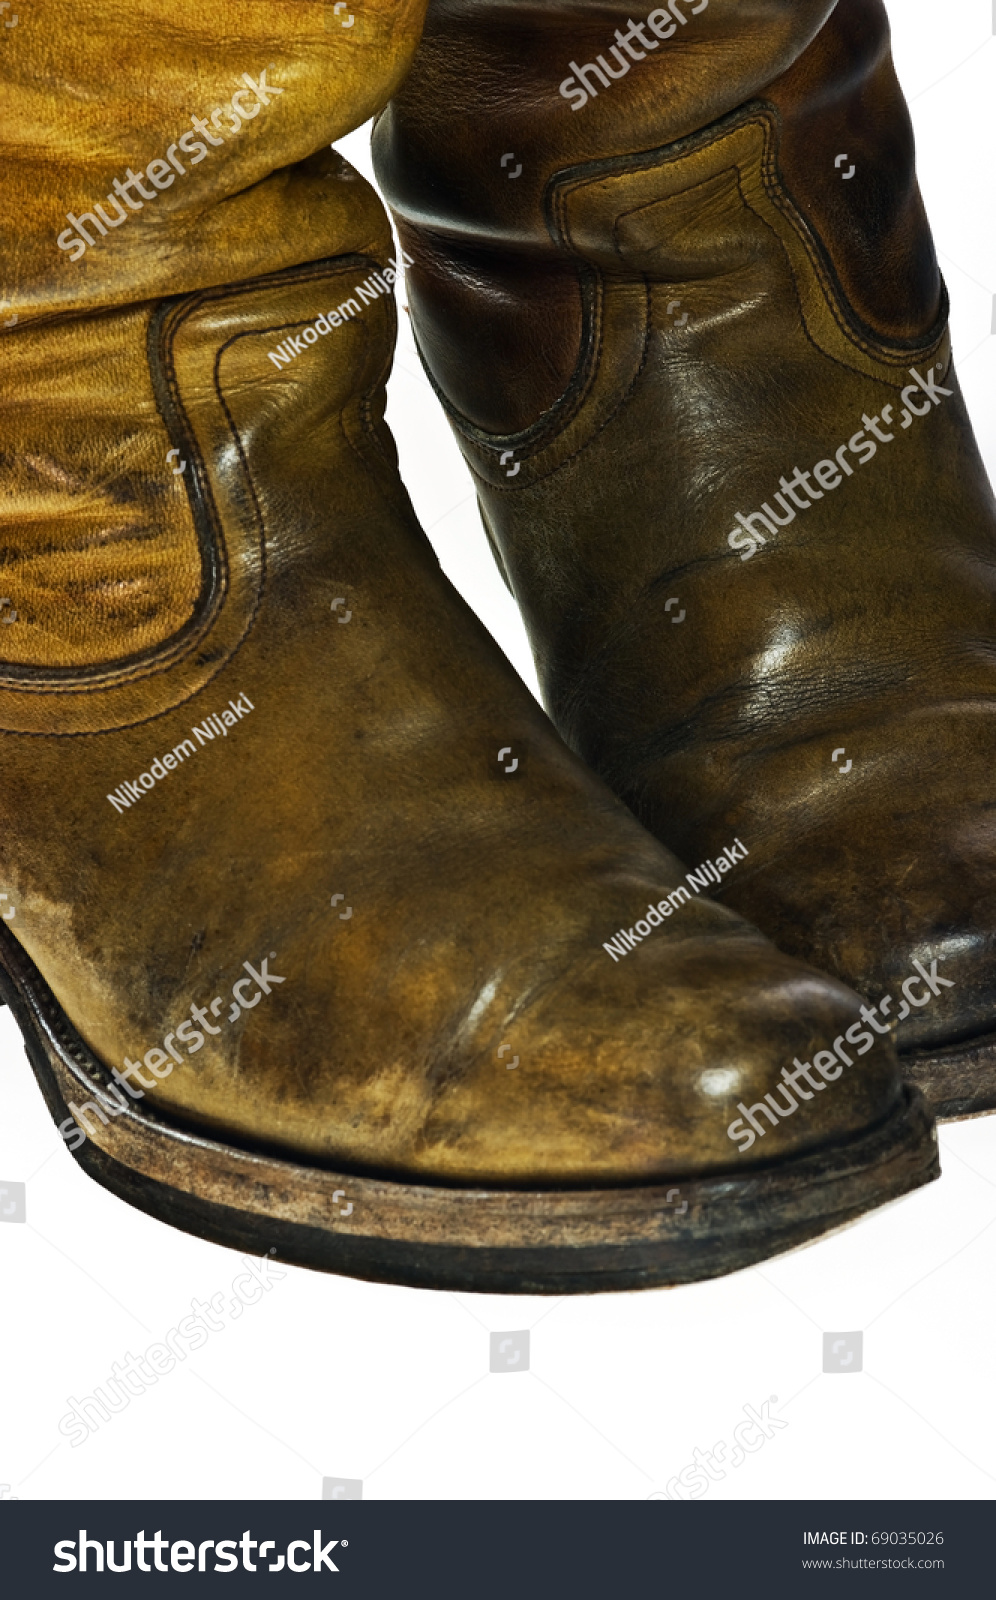 Old Worn Cowboy Style Boots Seventies Stock Photo 69035026 - Shutterstock